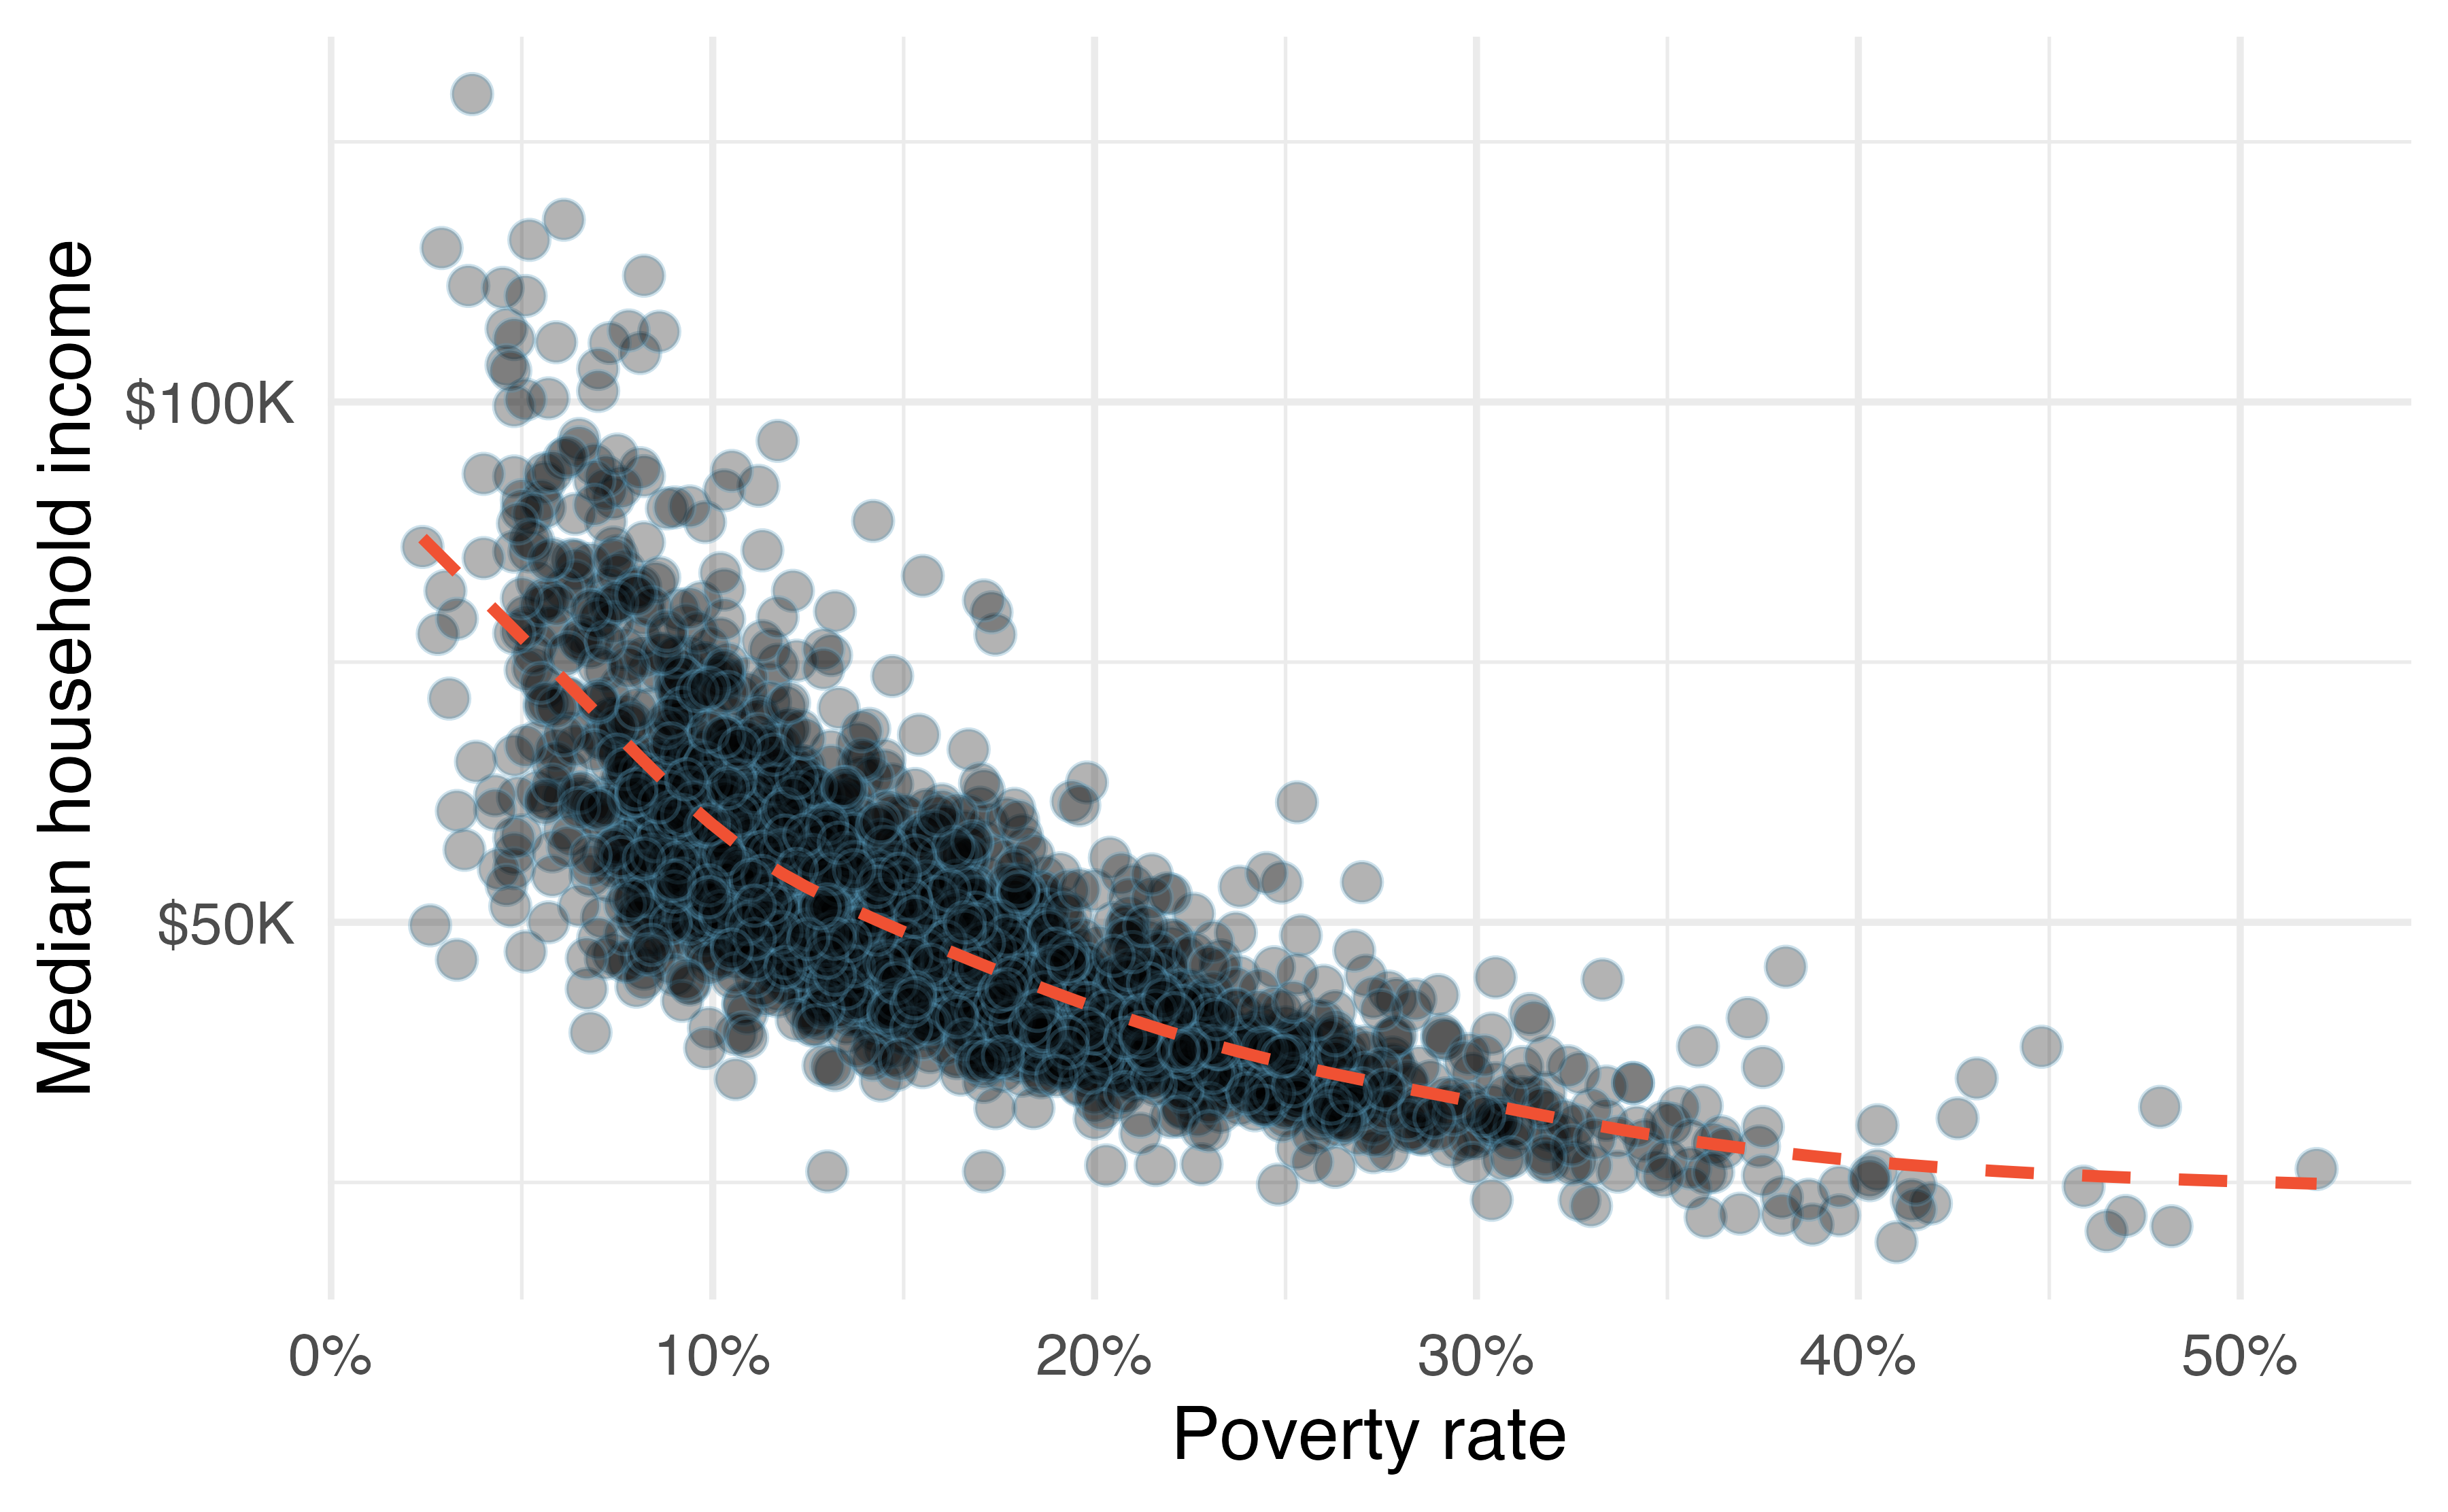 A scatterplot with poverty rate on the x-axis and median household income on the y-axis.  The relationship is negative and curvilinear. The bulk of the points fall with a poverty rate of 10% to 20% and a median household income of $25K to $75K.